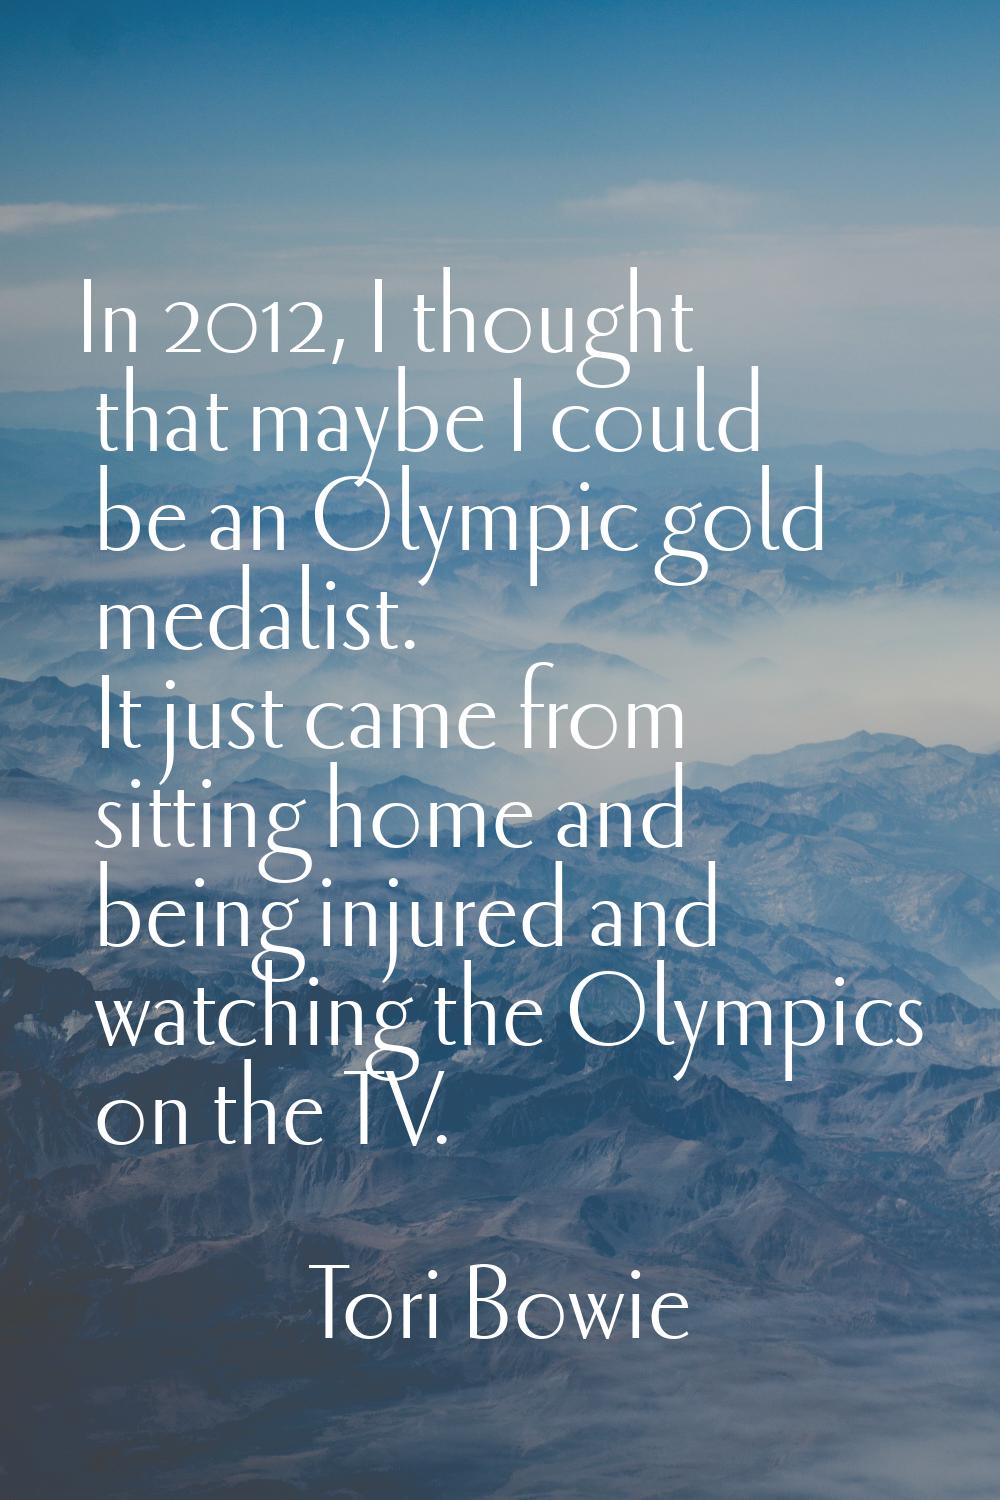 In 2012, I thought that maybe I could be an Olympic gold medalist. It just came from sitting home a